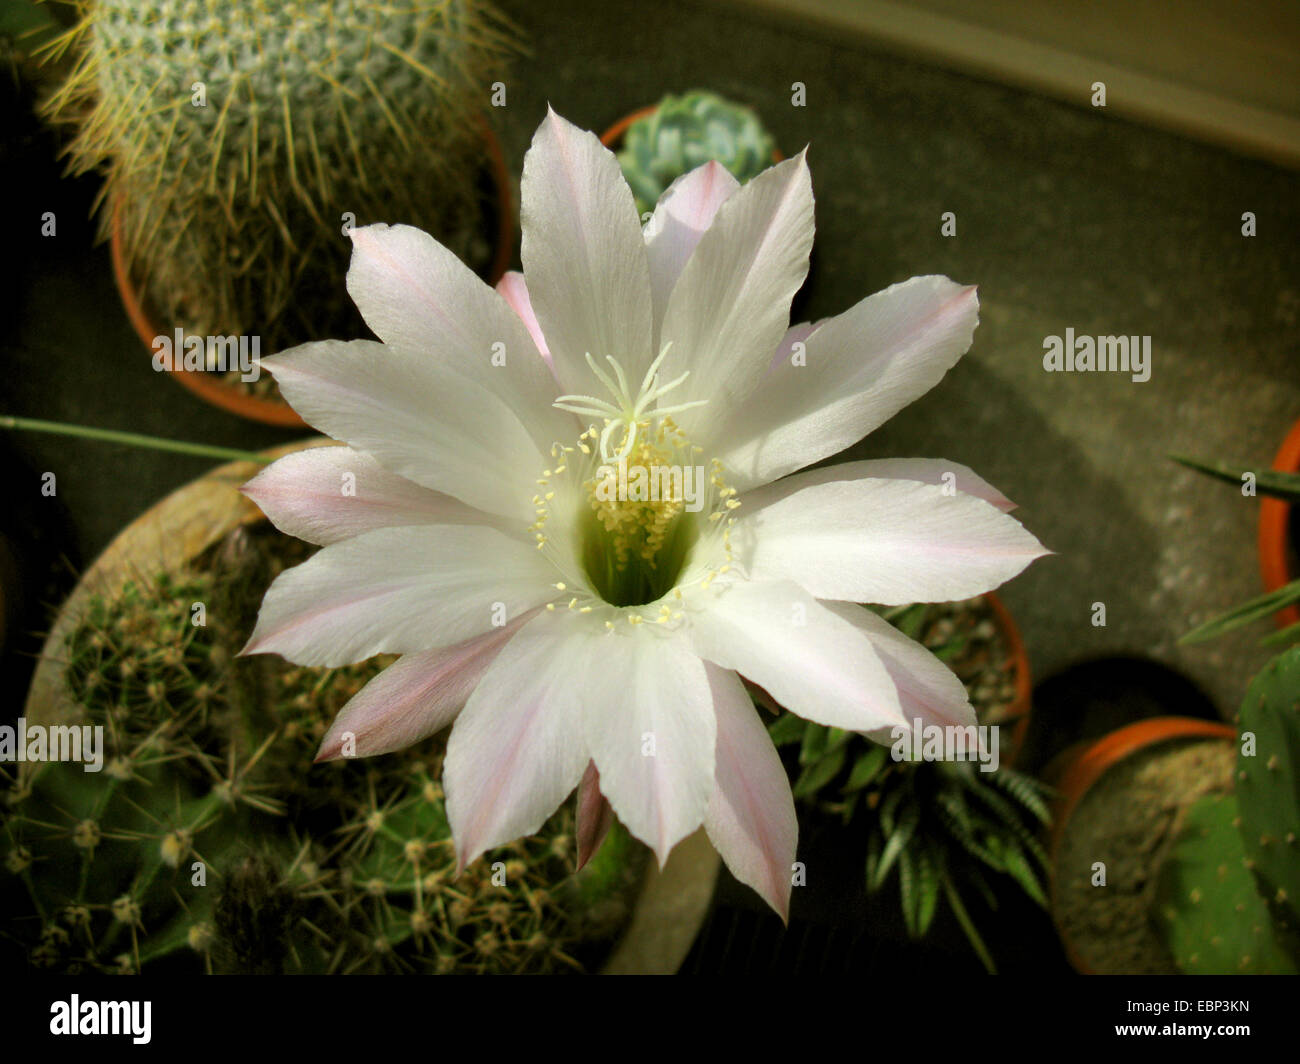 cob cactus (Echinopsis spec.), blooming on a window sill Stock Photo